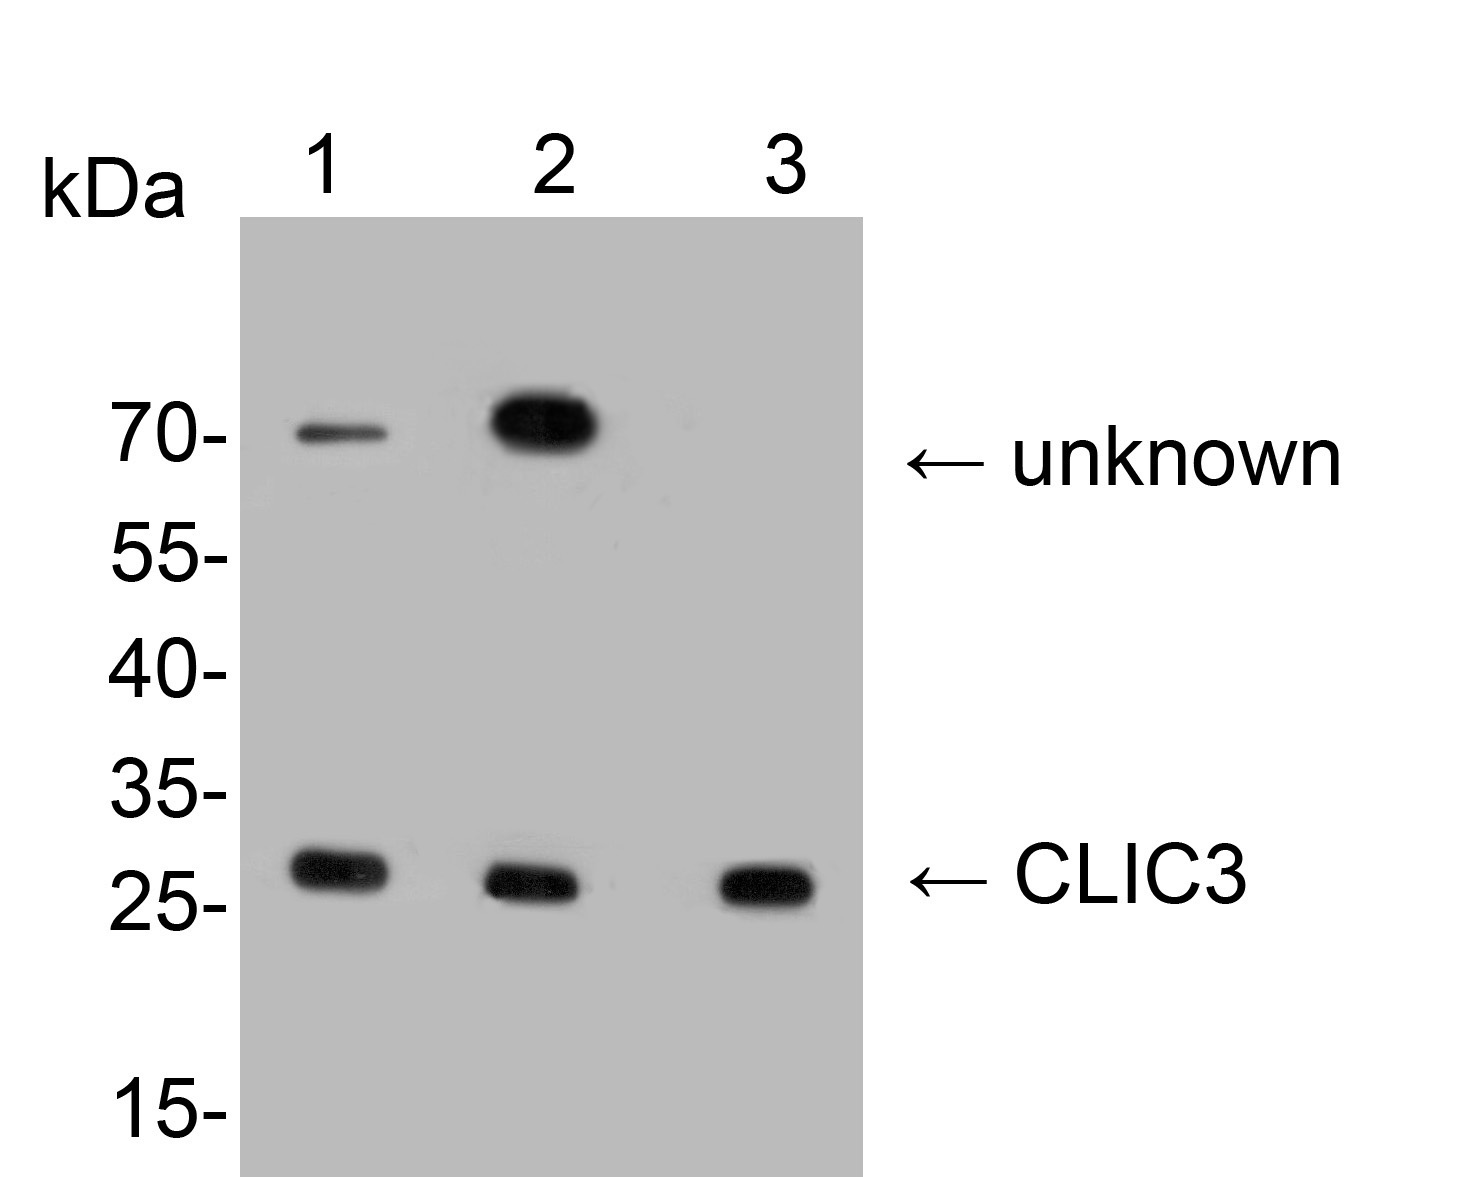 Western blot analysis of CLIC3 on different lysates. Proteins were transferred to a PVDF membrane and blocked with 5% NFDM/TBST for 1 hour at room temperature. The primary antibody (HA500316, 1/500) was used in 5% NFDM/TBST at room temperature for 2 hours. Goat Anti-Rabbit IgG - HRP Secondary Antibody (HA1001) at 1:200,000 dilution was used for 1 hour at room temperature.<br />
Positive control: <br />
Lane 1: Human placenta tissue lysate<br />
Lane 2: Mouse lung tissue lysate<br />
Lane 3: Human lung tissue lysate